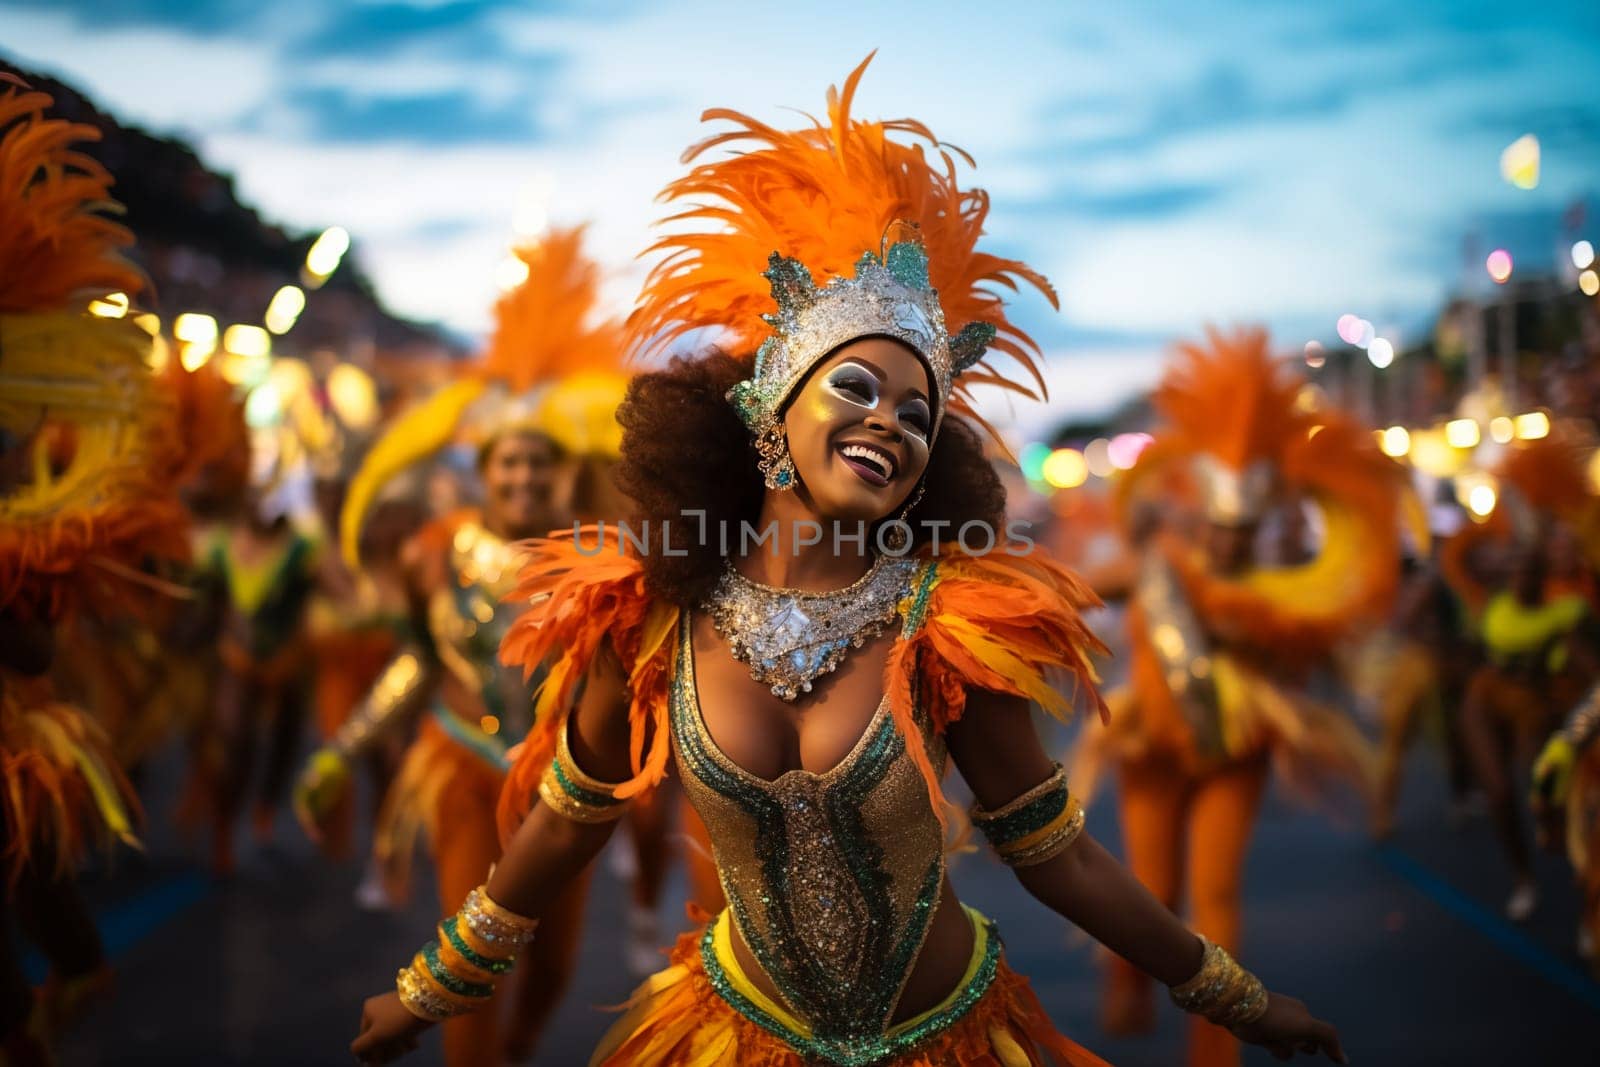 Captivating image capturing the essence of the Rio Carnival, showcasing a dancer adorned in an elaborate, vibrant costume, embodying the spirit and energy of this iconic festival